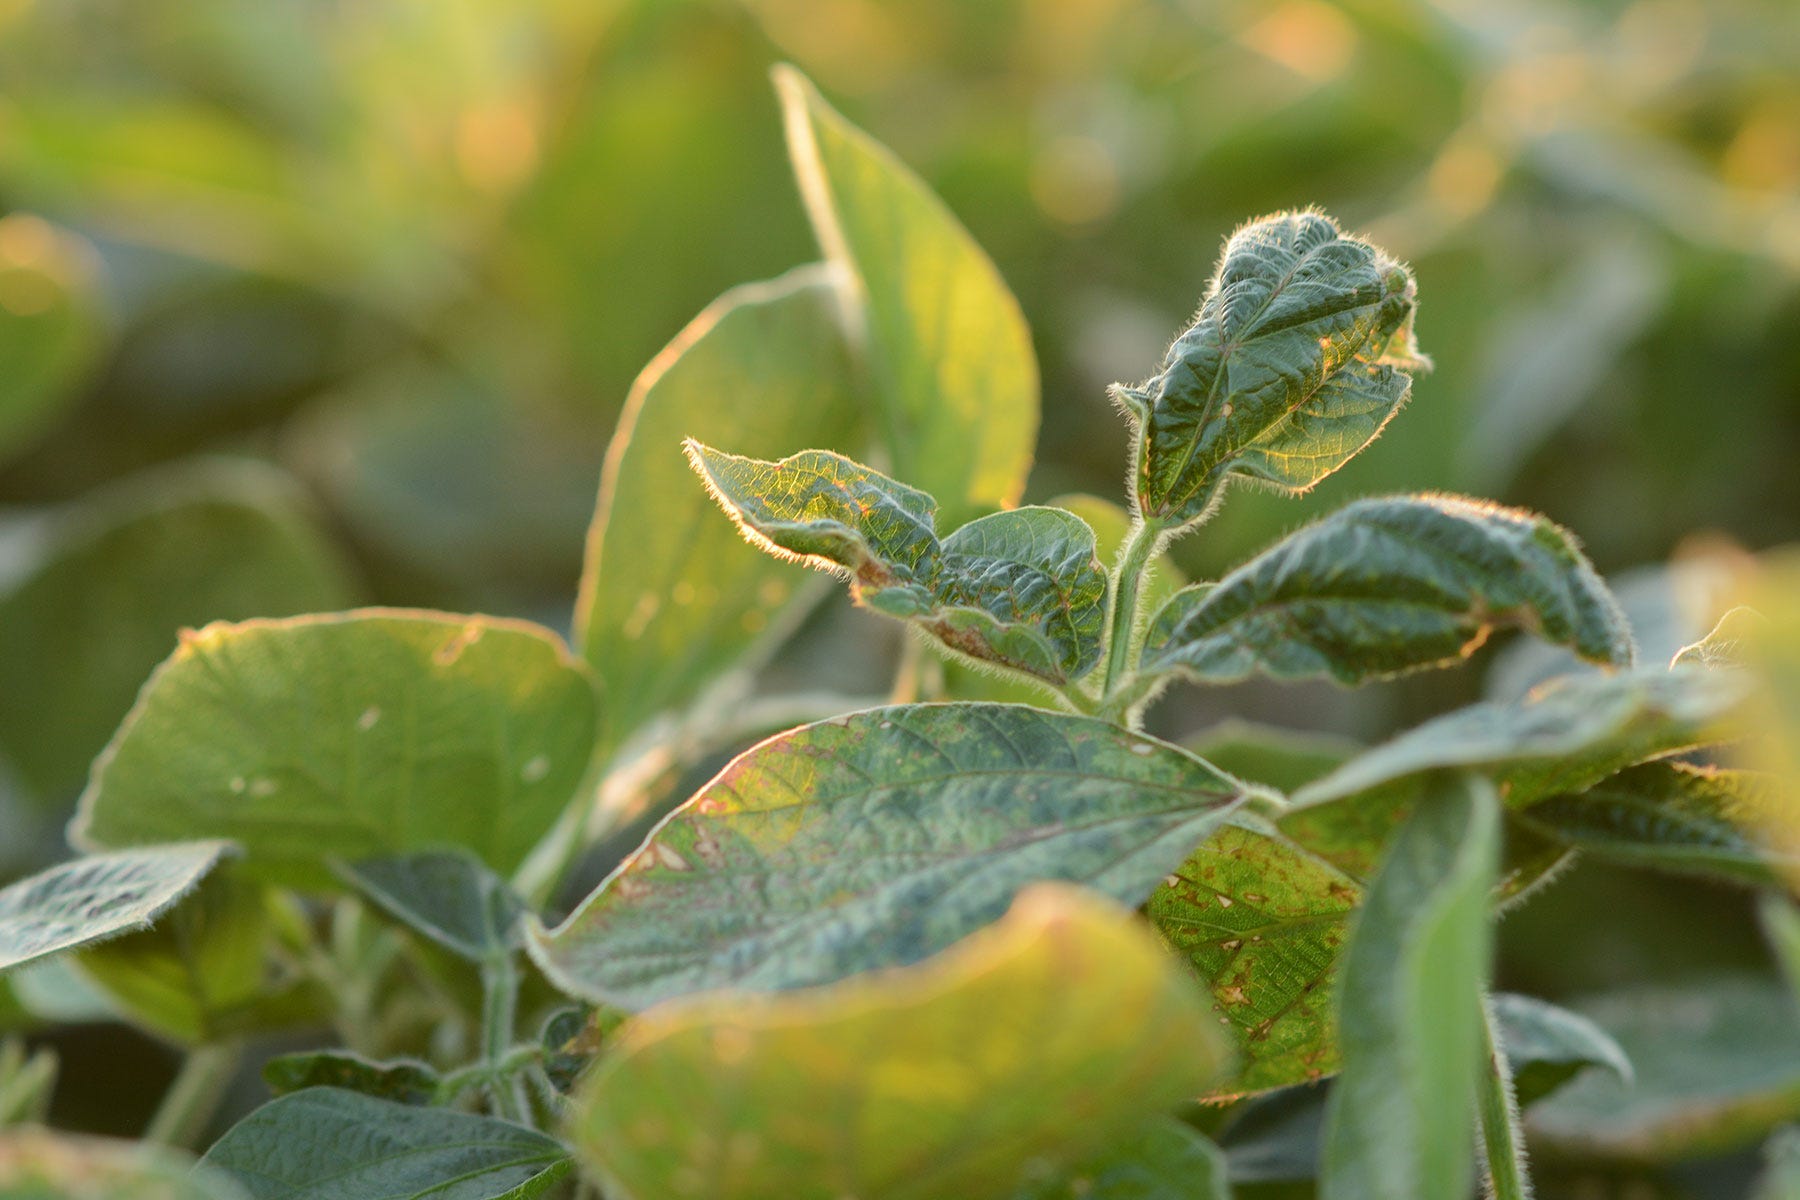 soybeans with dicamba damage